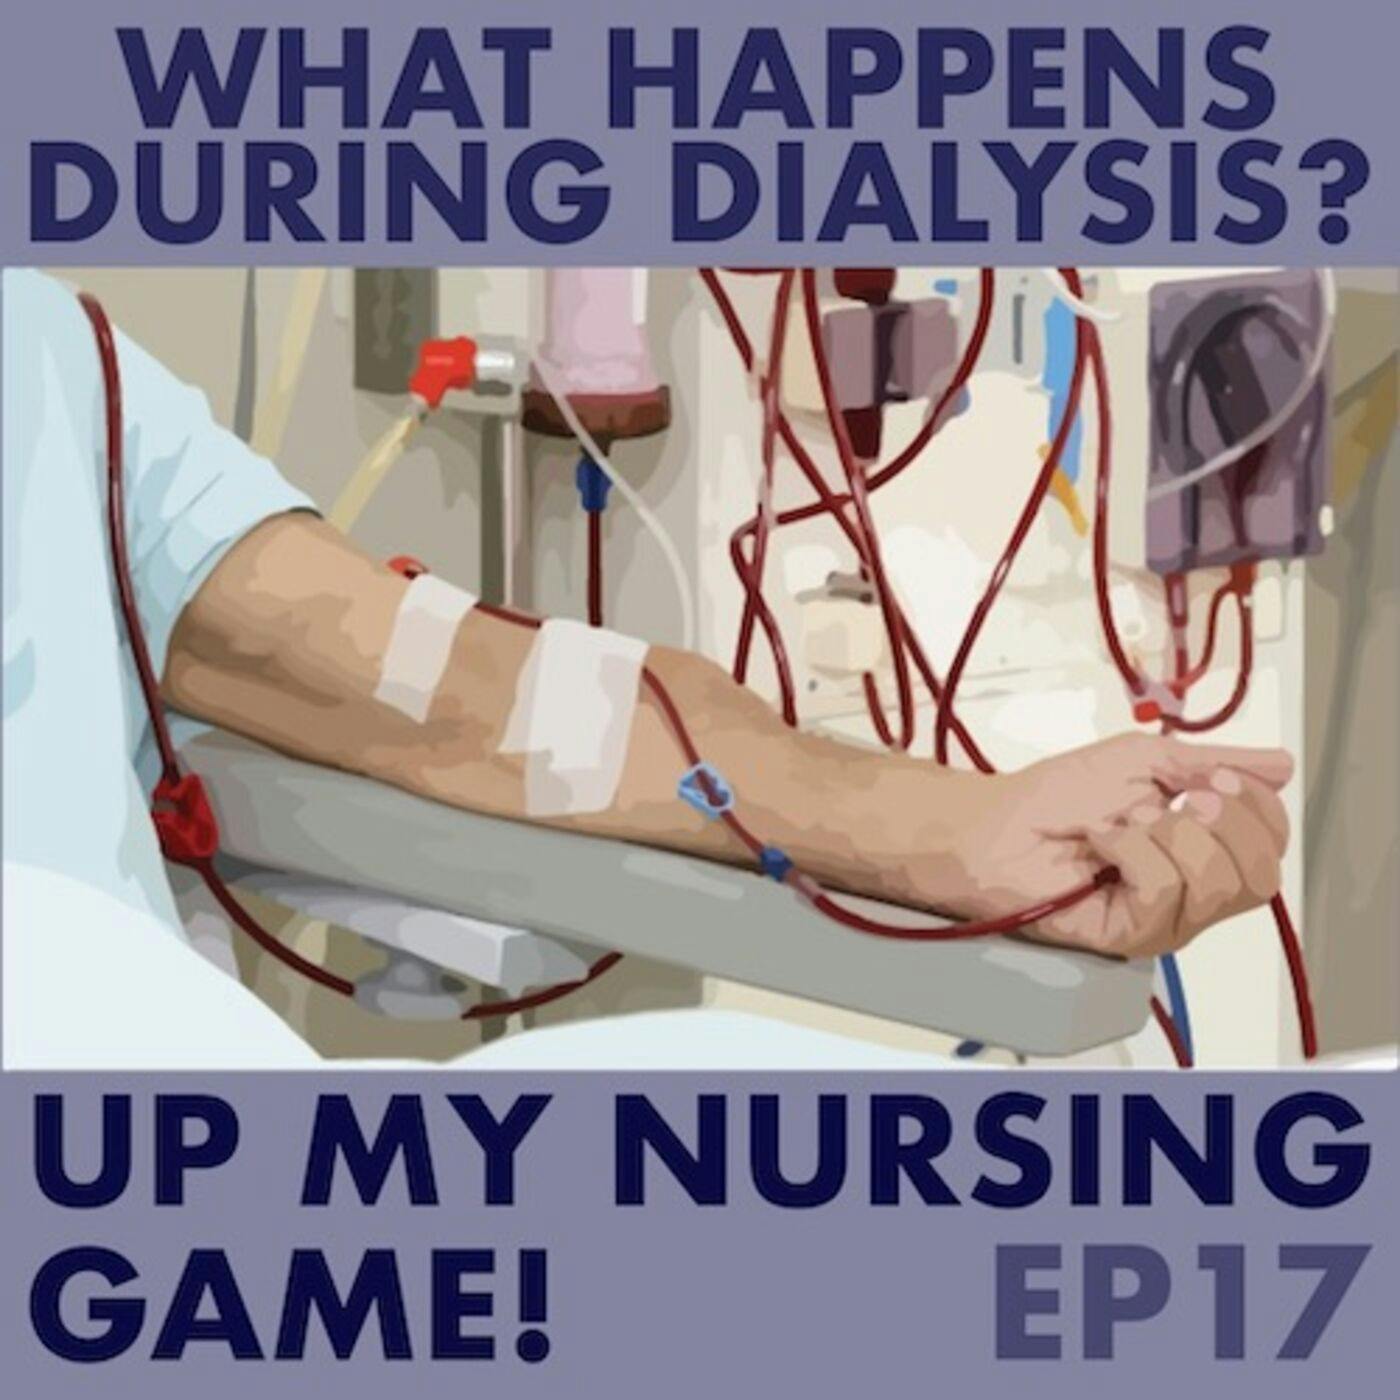 What Happens During Dialysis with Jameisha Rogers, RN